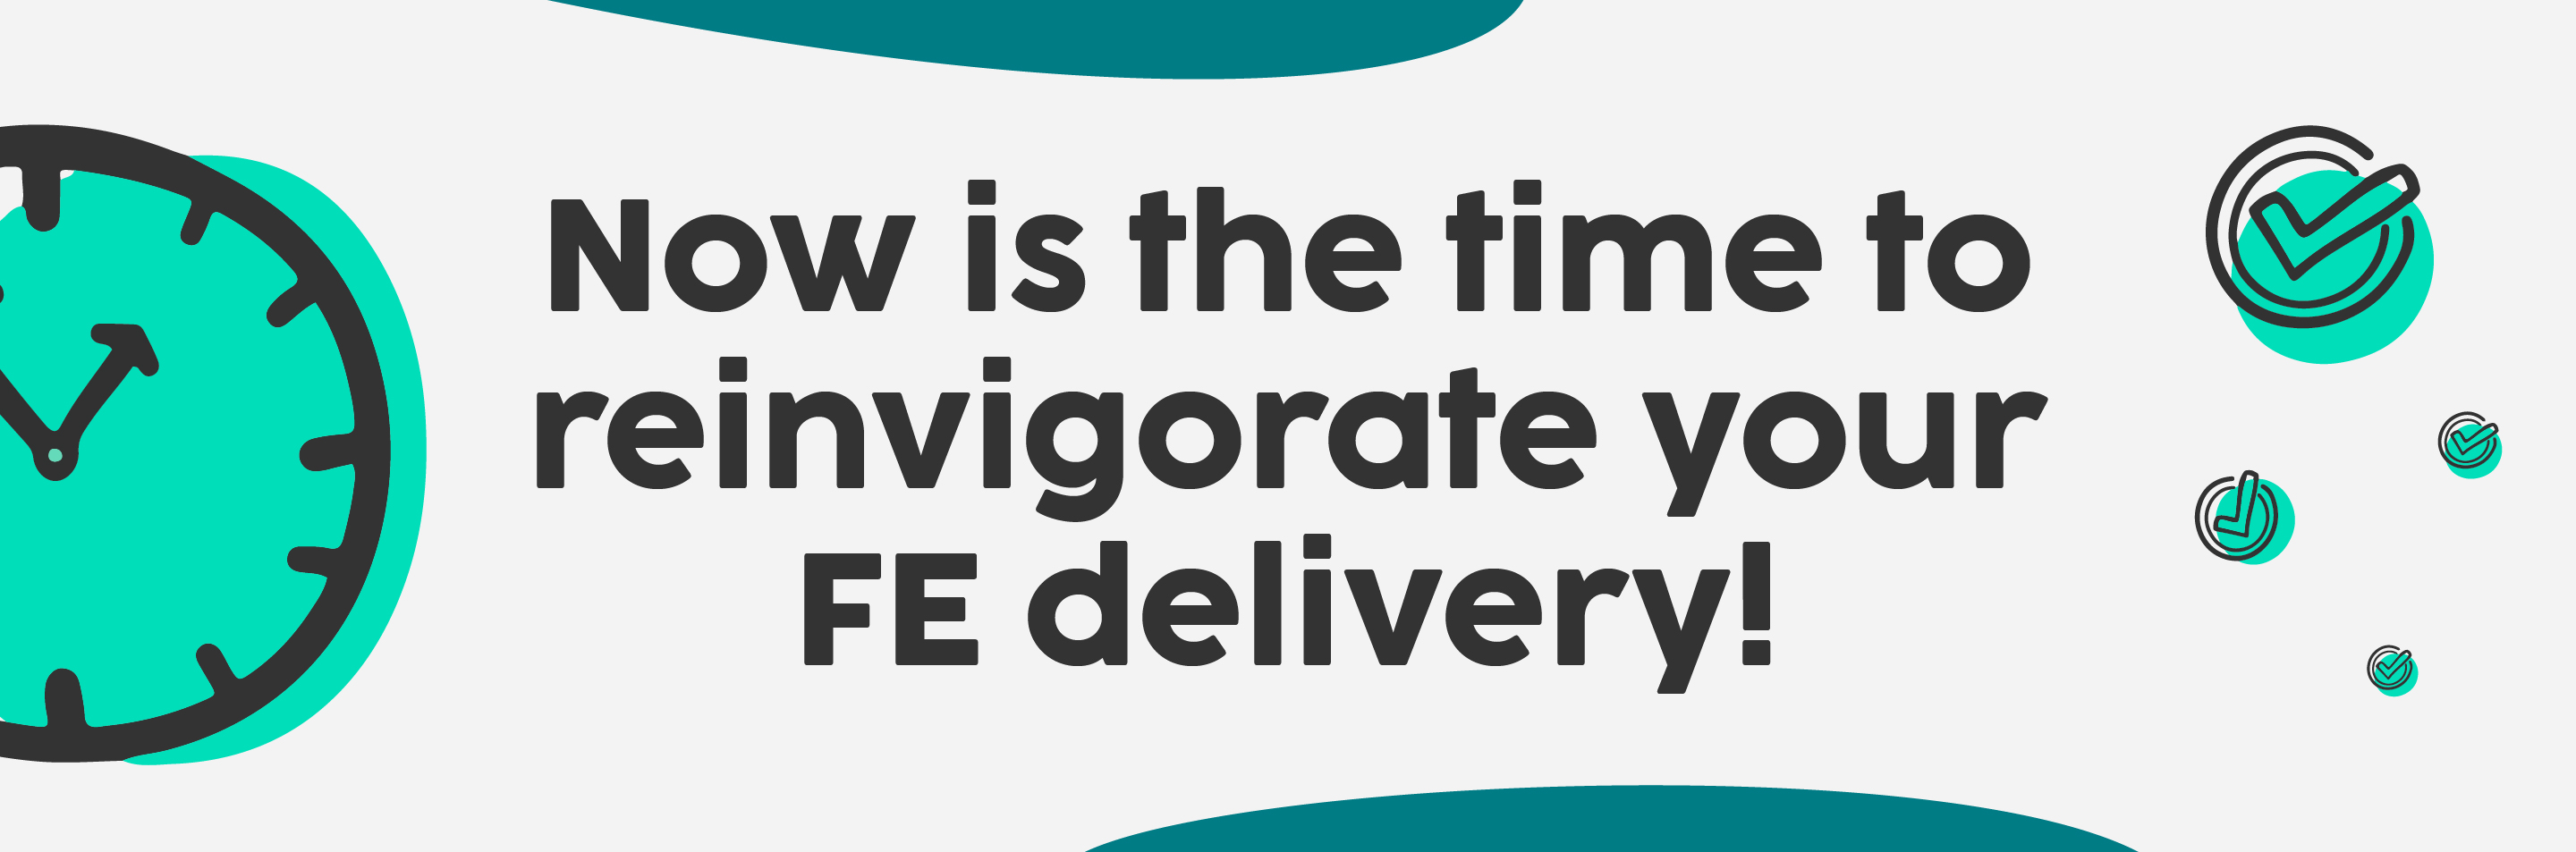 now is the time to re-invigorate your delivery